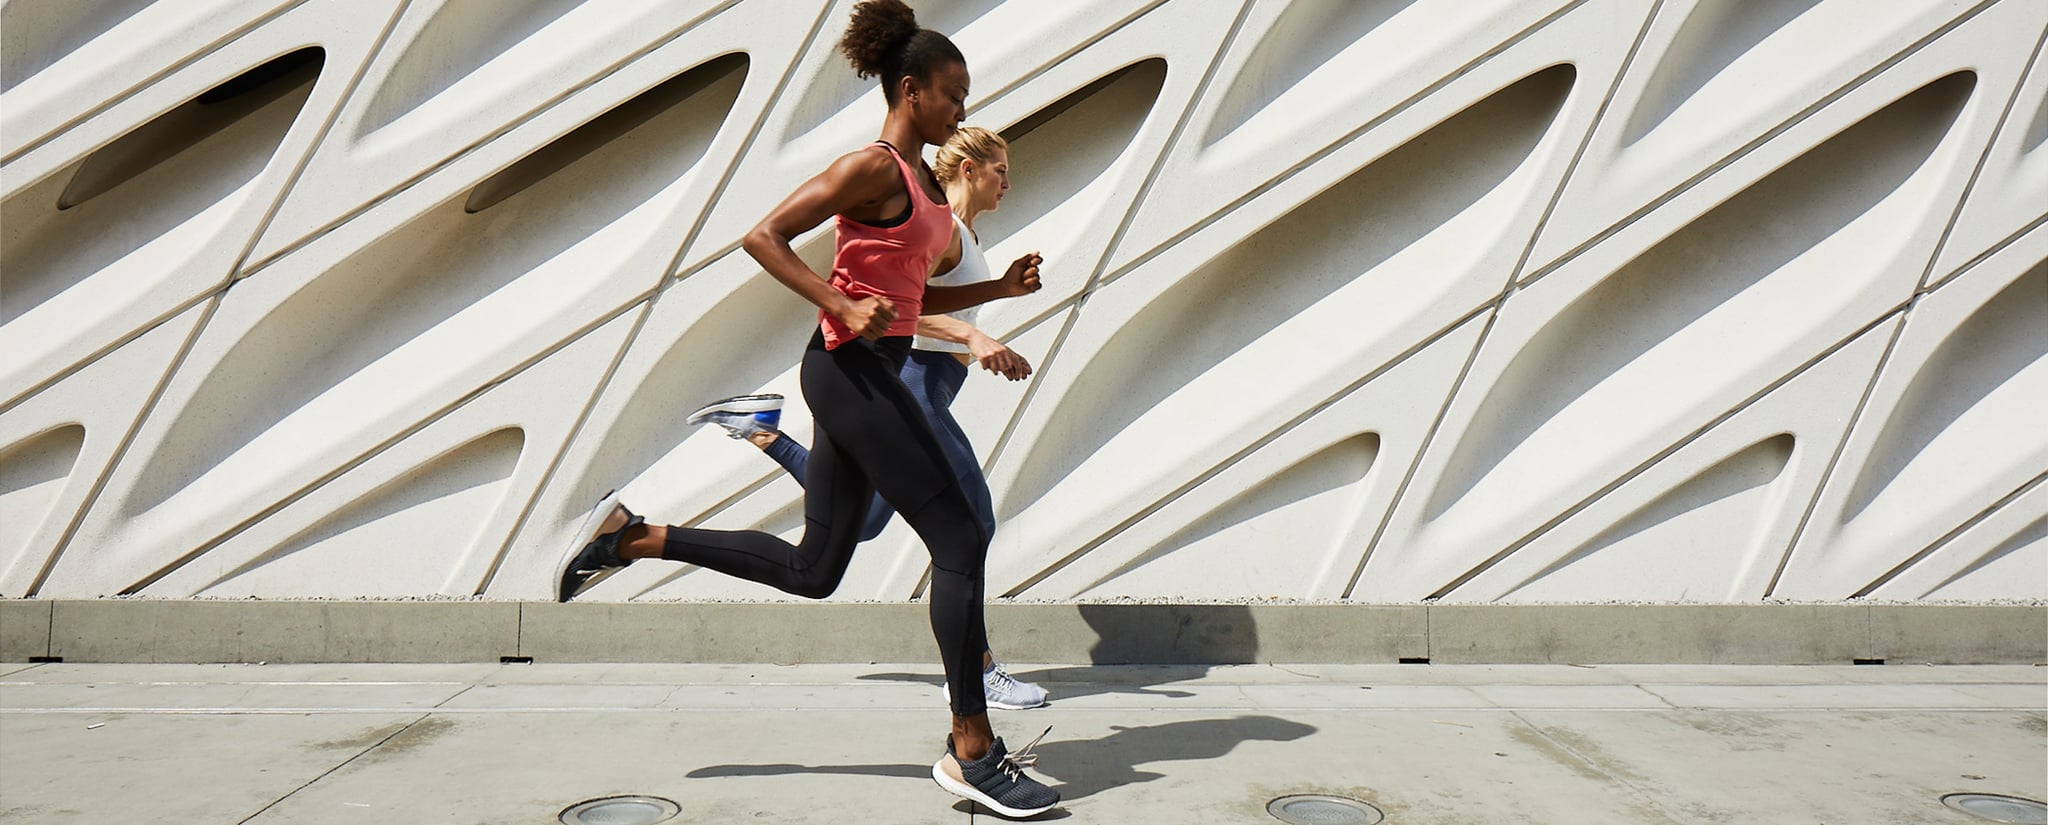 Why Running With a Friend Is the Best | POPSUGAR Fitness